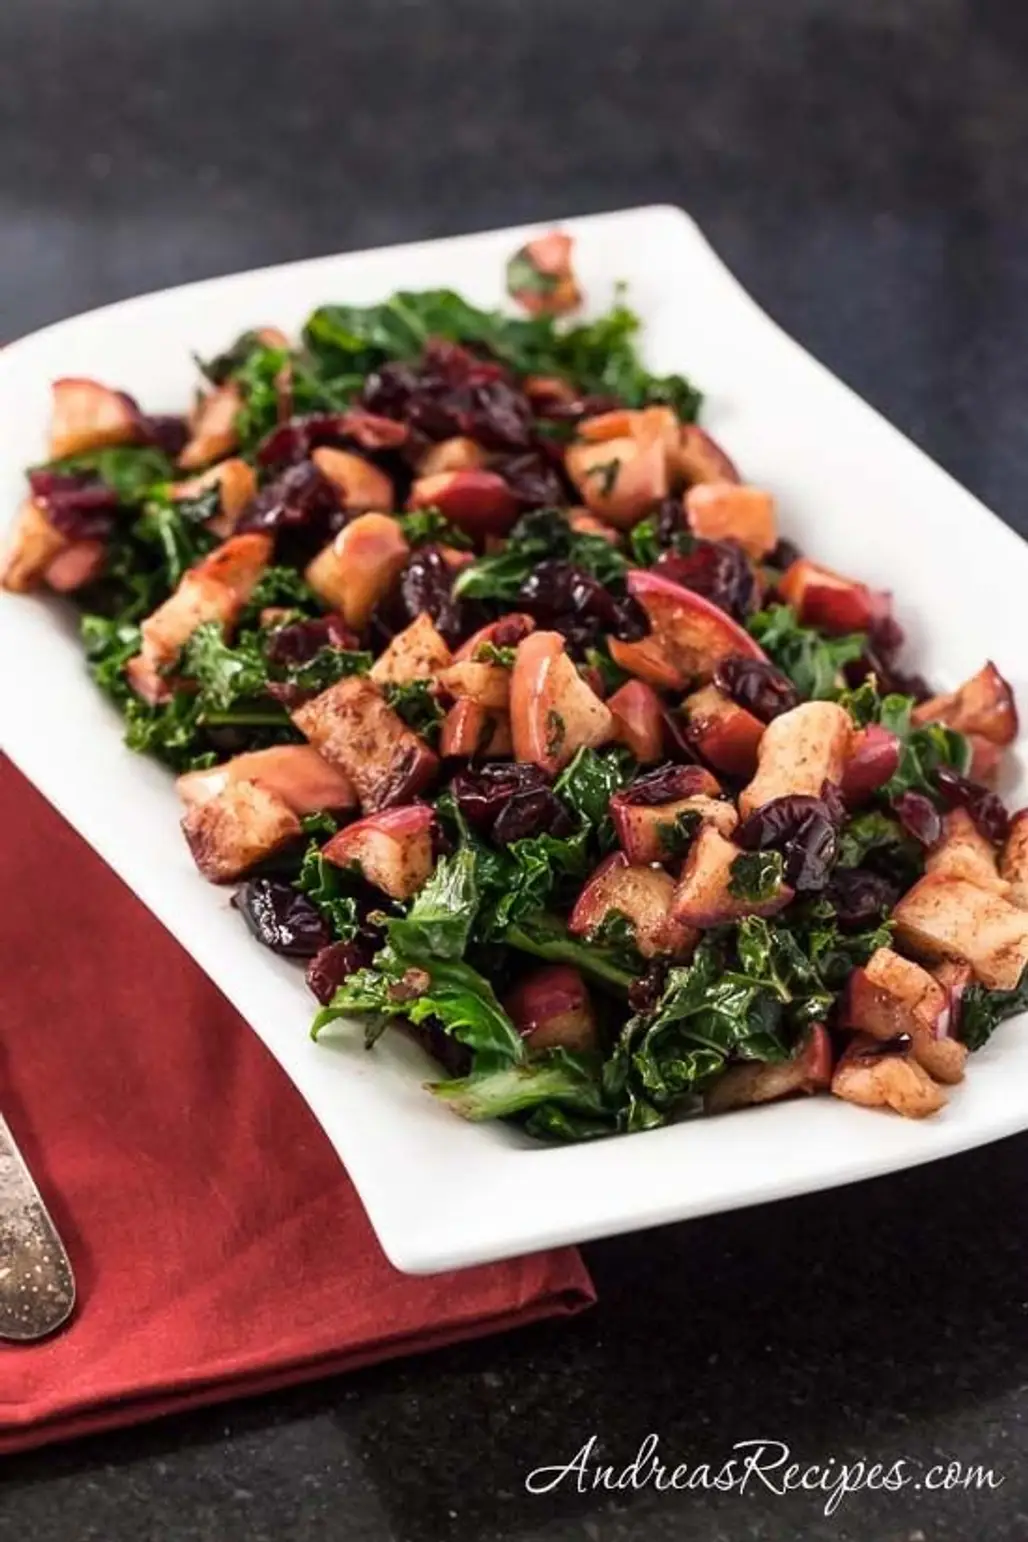 Warm Kale Salad with Dried Cranberries and Apples